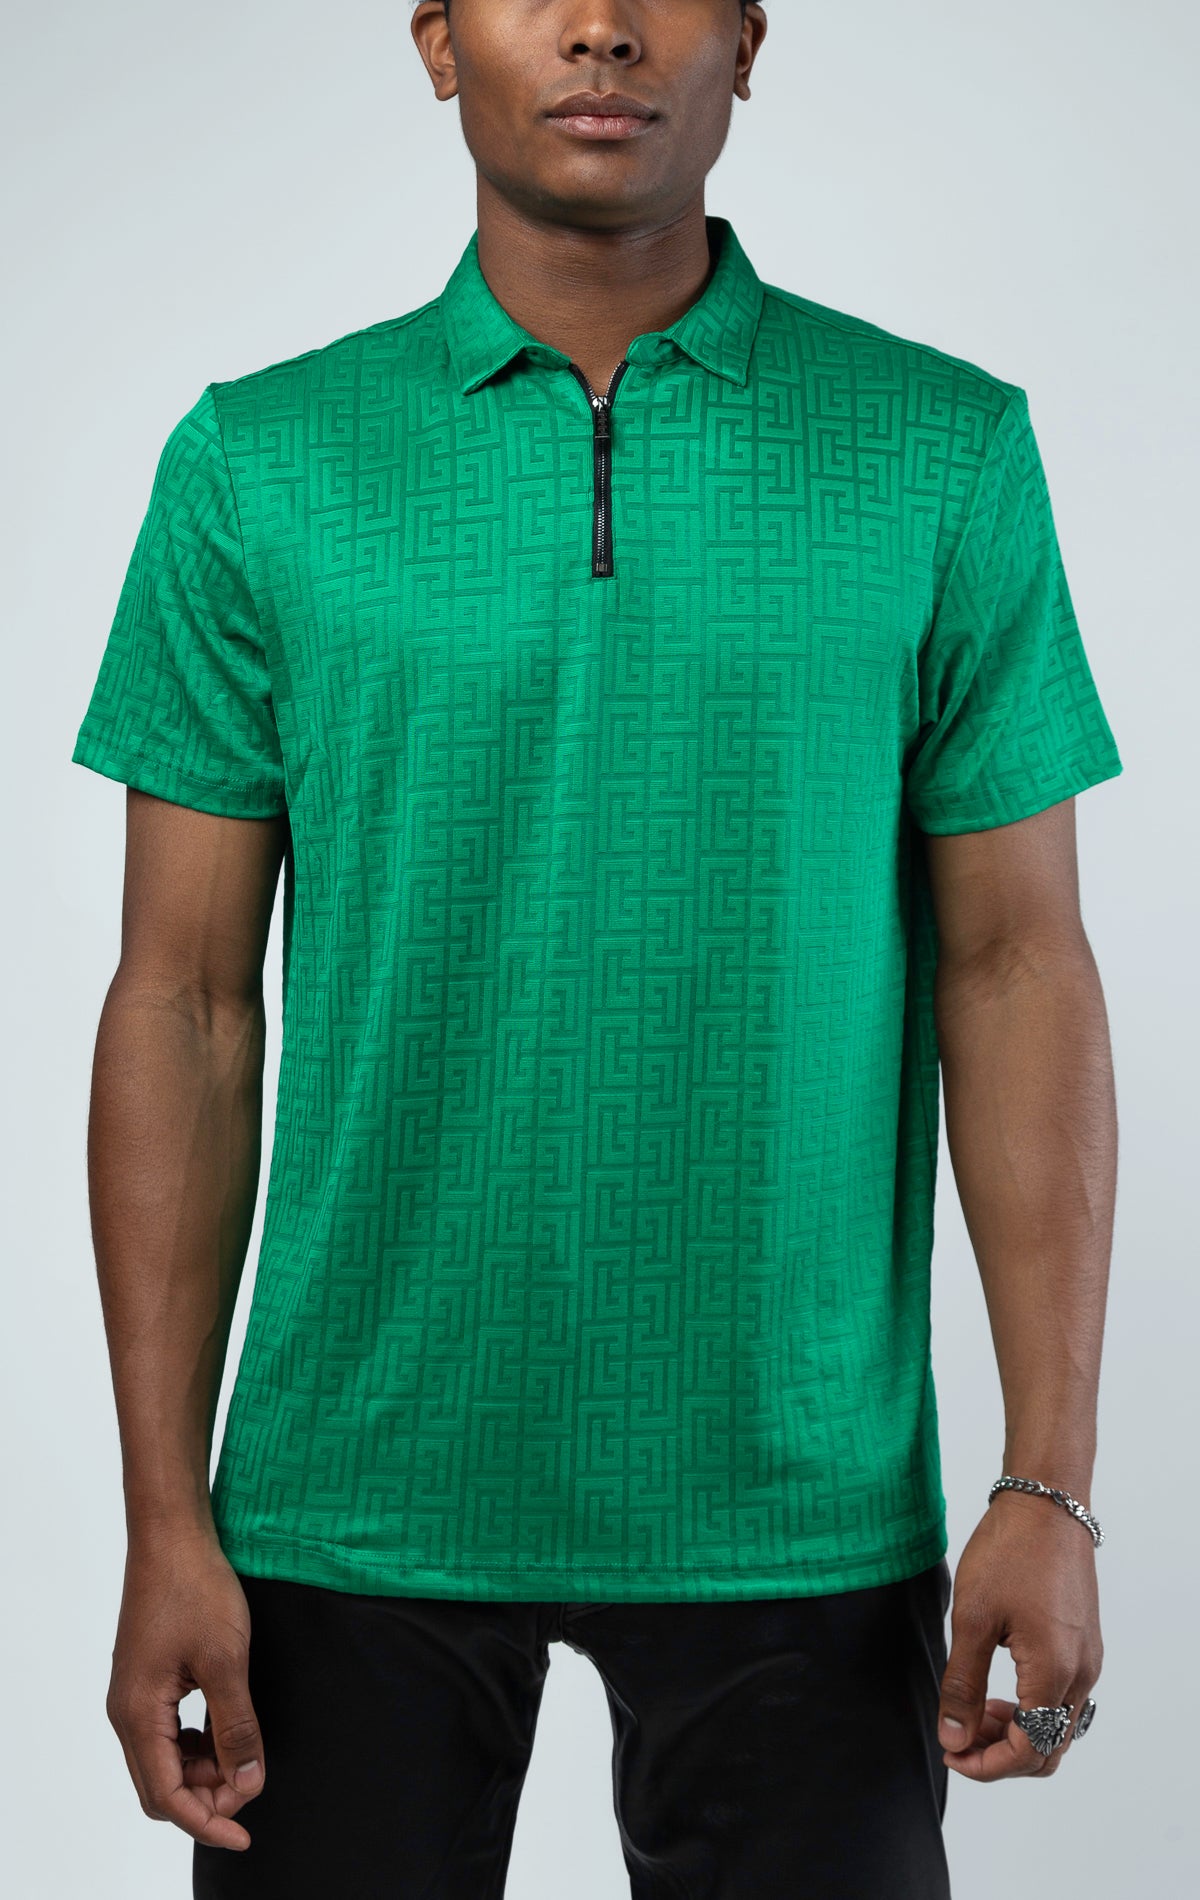 Green This polo shirt is made with Greek key textured fabric. Features a pointed collar, quarter zip-up closure, and short sleeves.